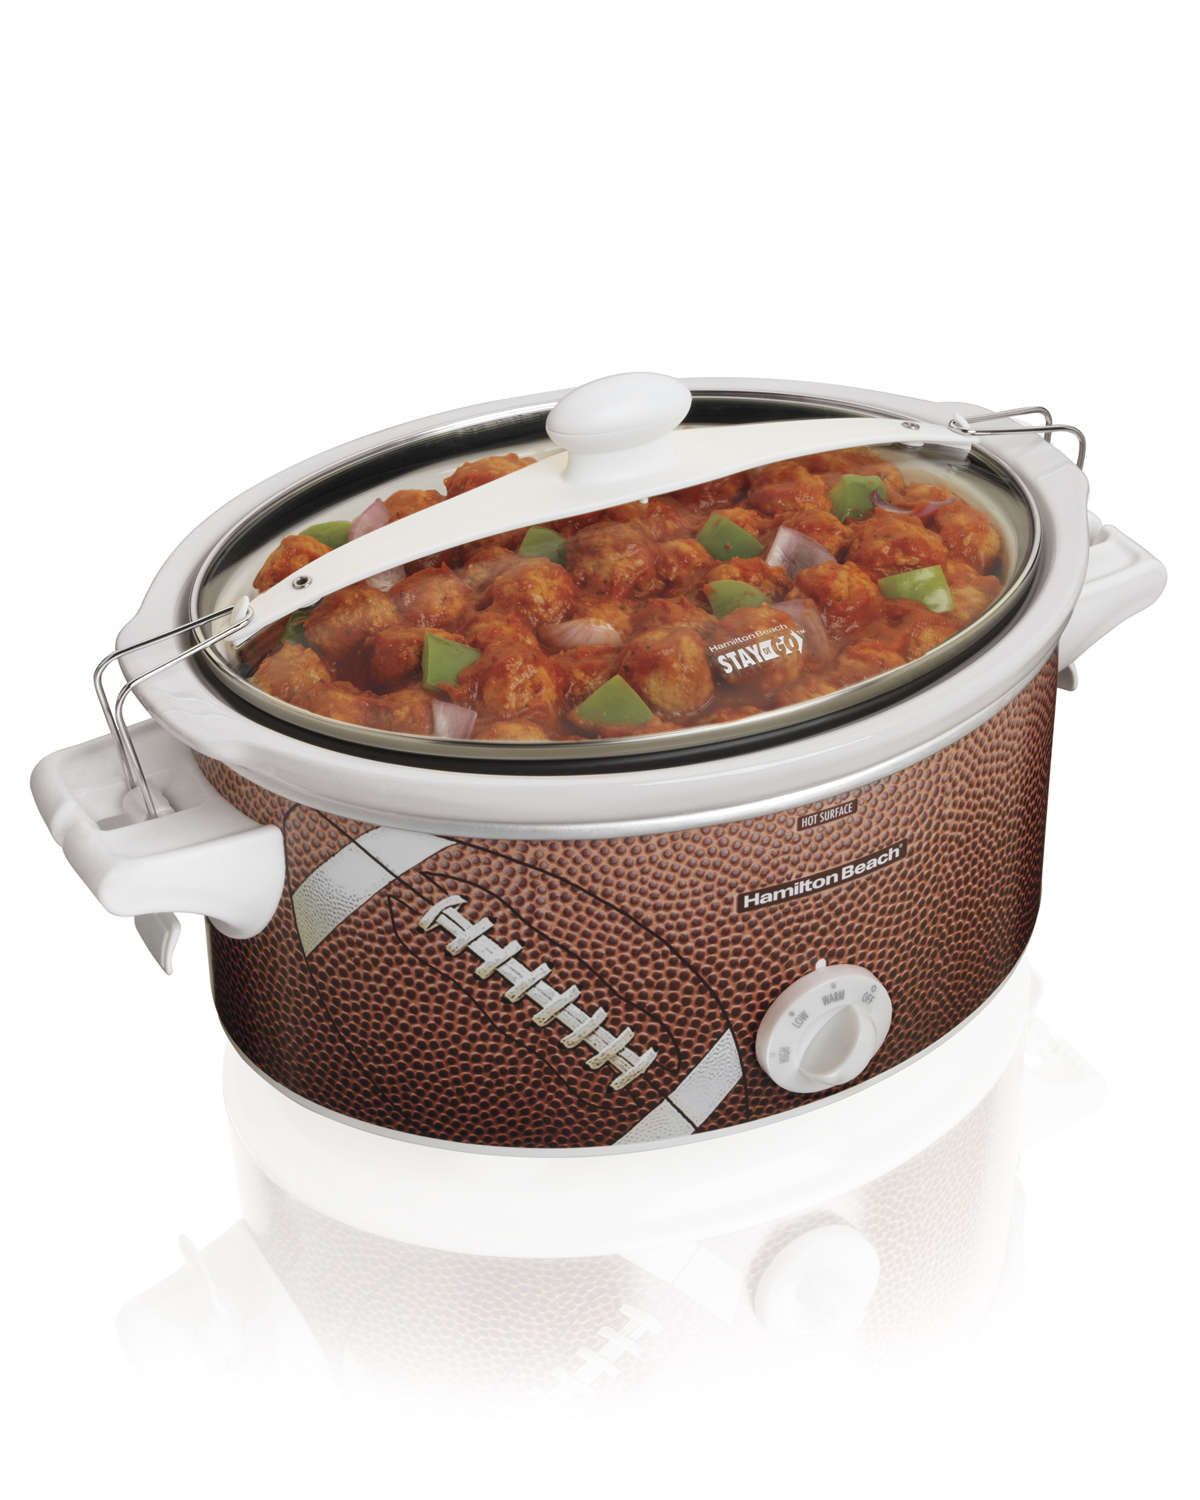 UPC 040094332663 product image for 33266 Stay or Go 6 Quart Slow Cooker | upcitemdb.com